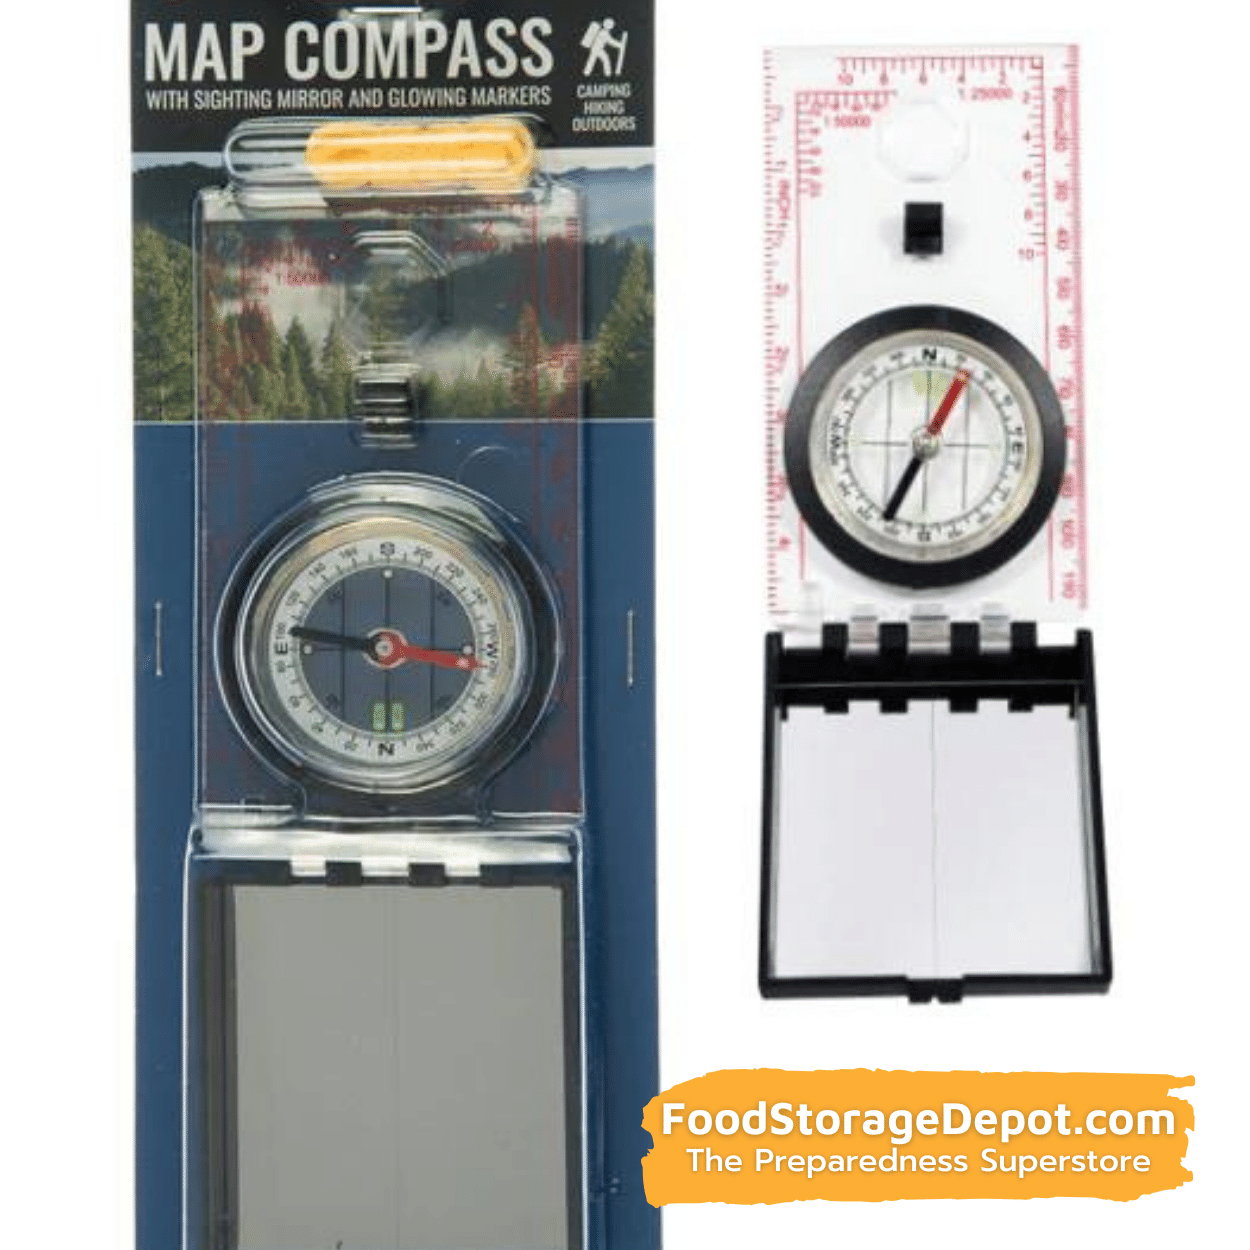 Compass with Sighting Mirror, Glowing Marker, and Lanyard